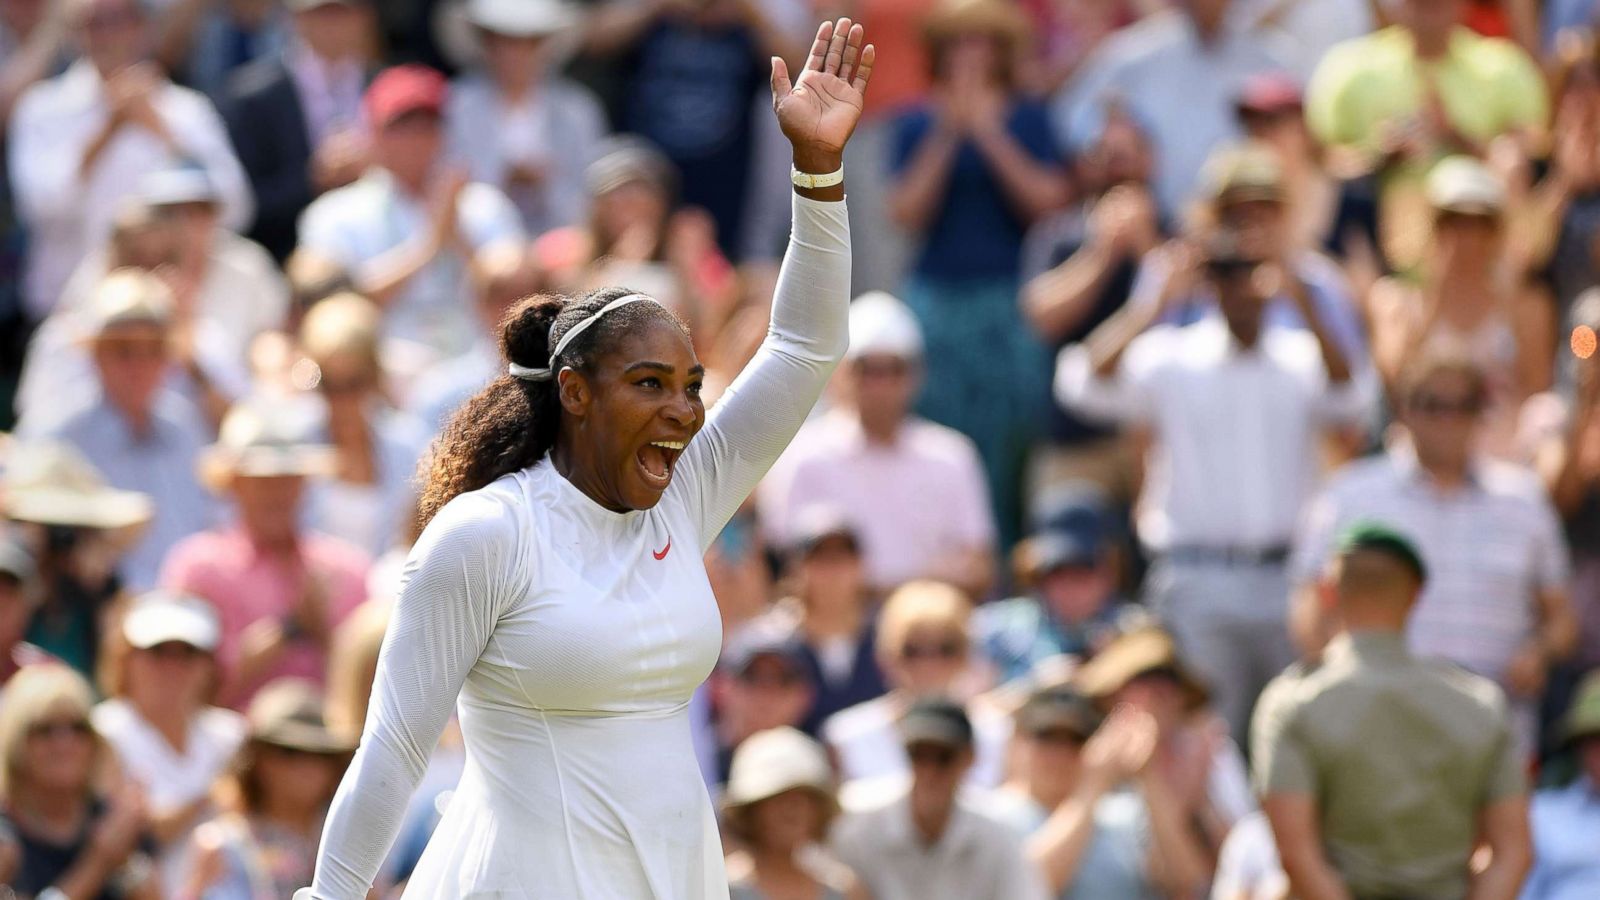 PHOTO: Serena Williams celebrates after beating Germany's Julia Goerges 6-2, 6-4 in their women's singles semi-final match at the 2018 Wimbledon Championships in London, July 12, 2018.